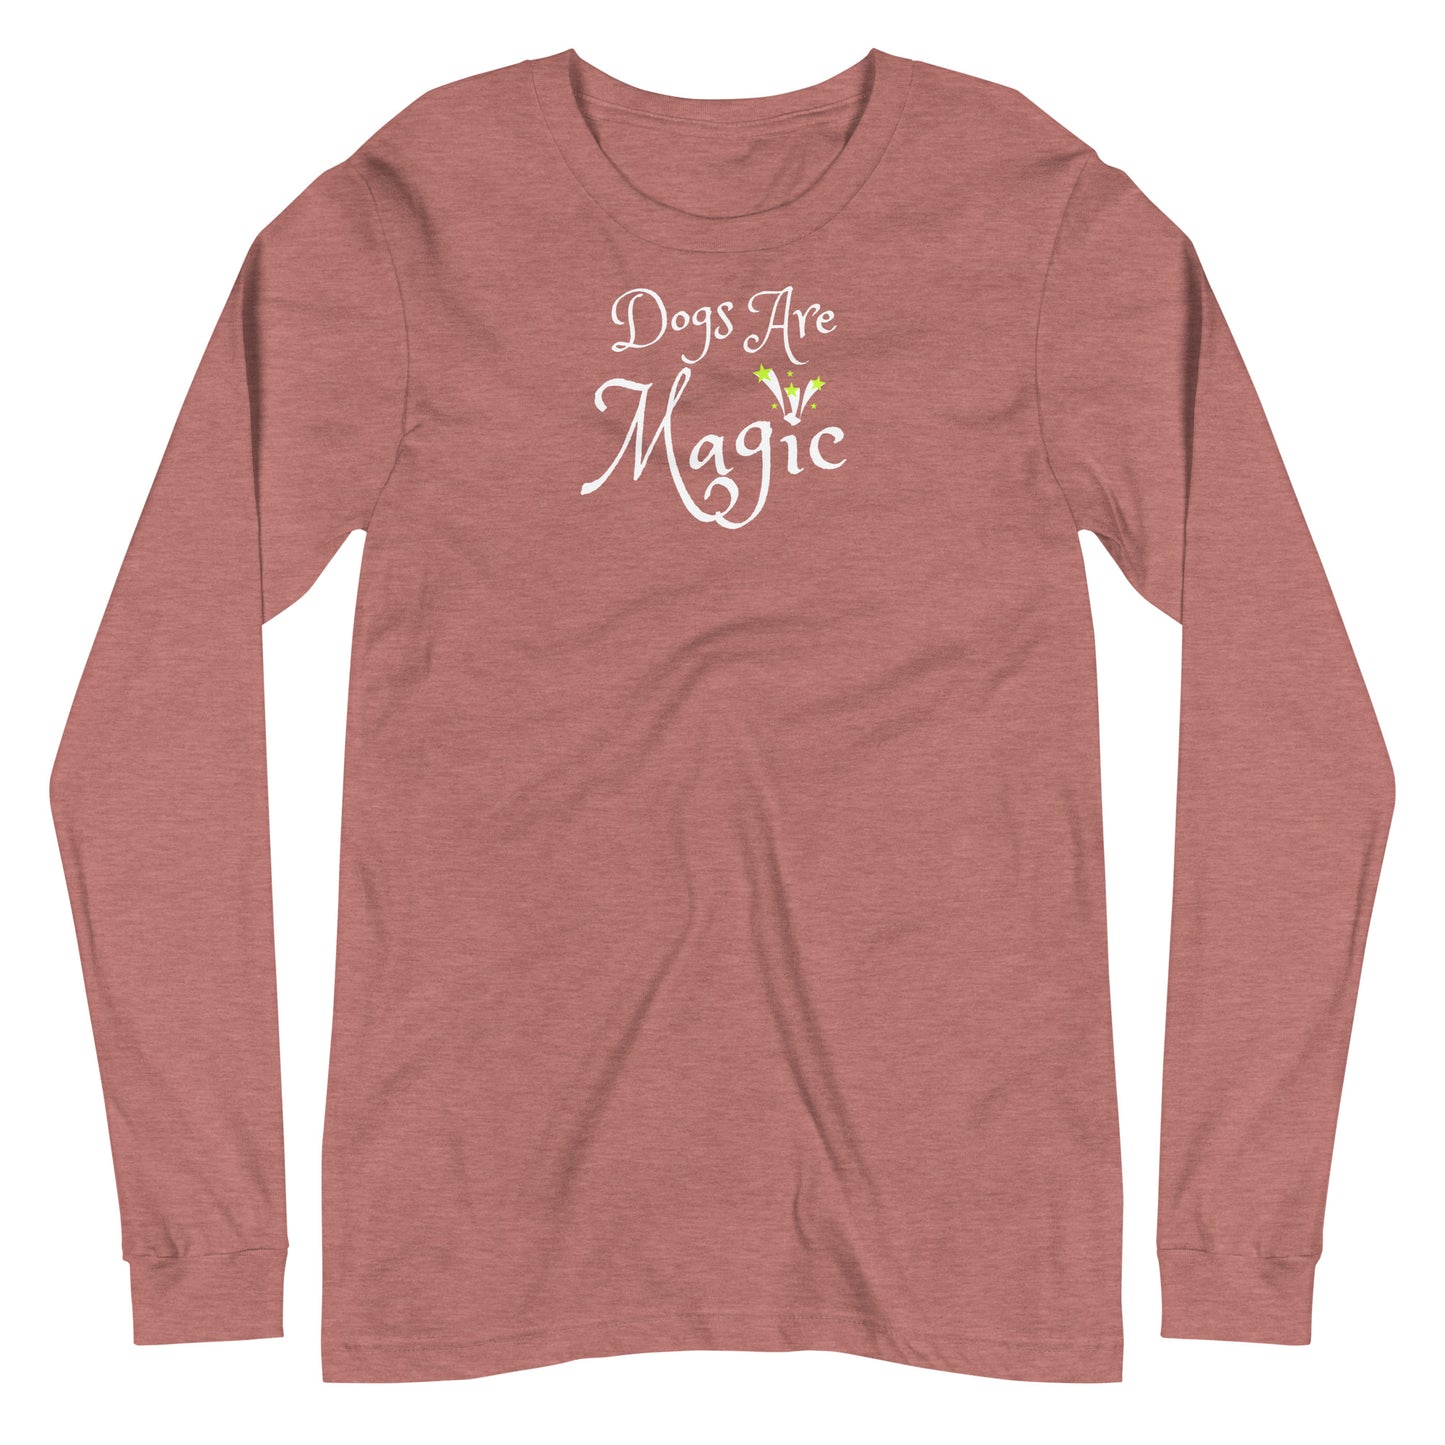 Dogs Are Magic - Dog Lovers Super Soft Comfy Long-Sleeved T-shirt